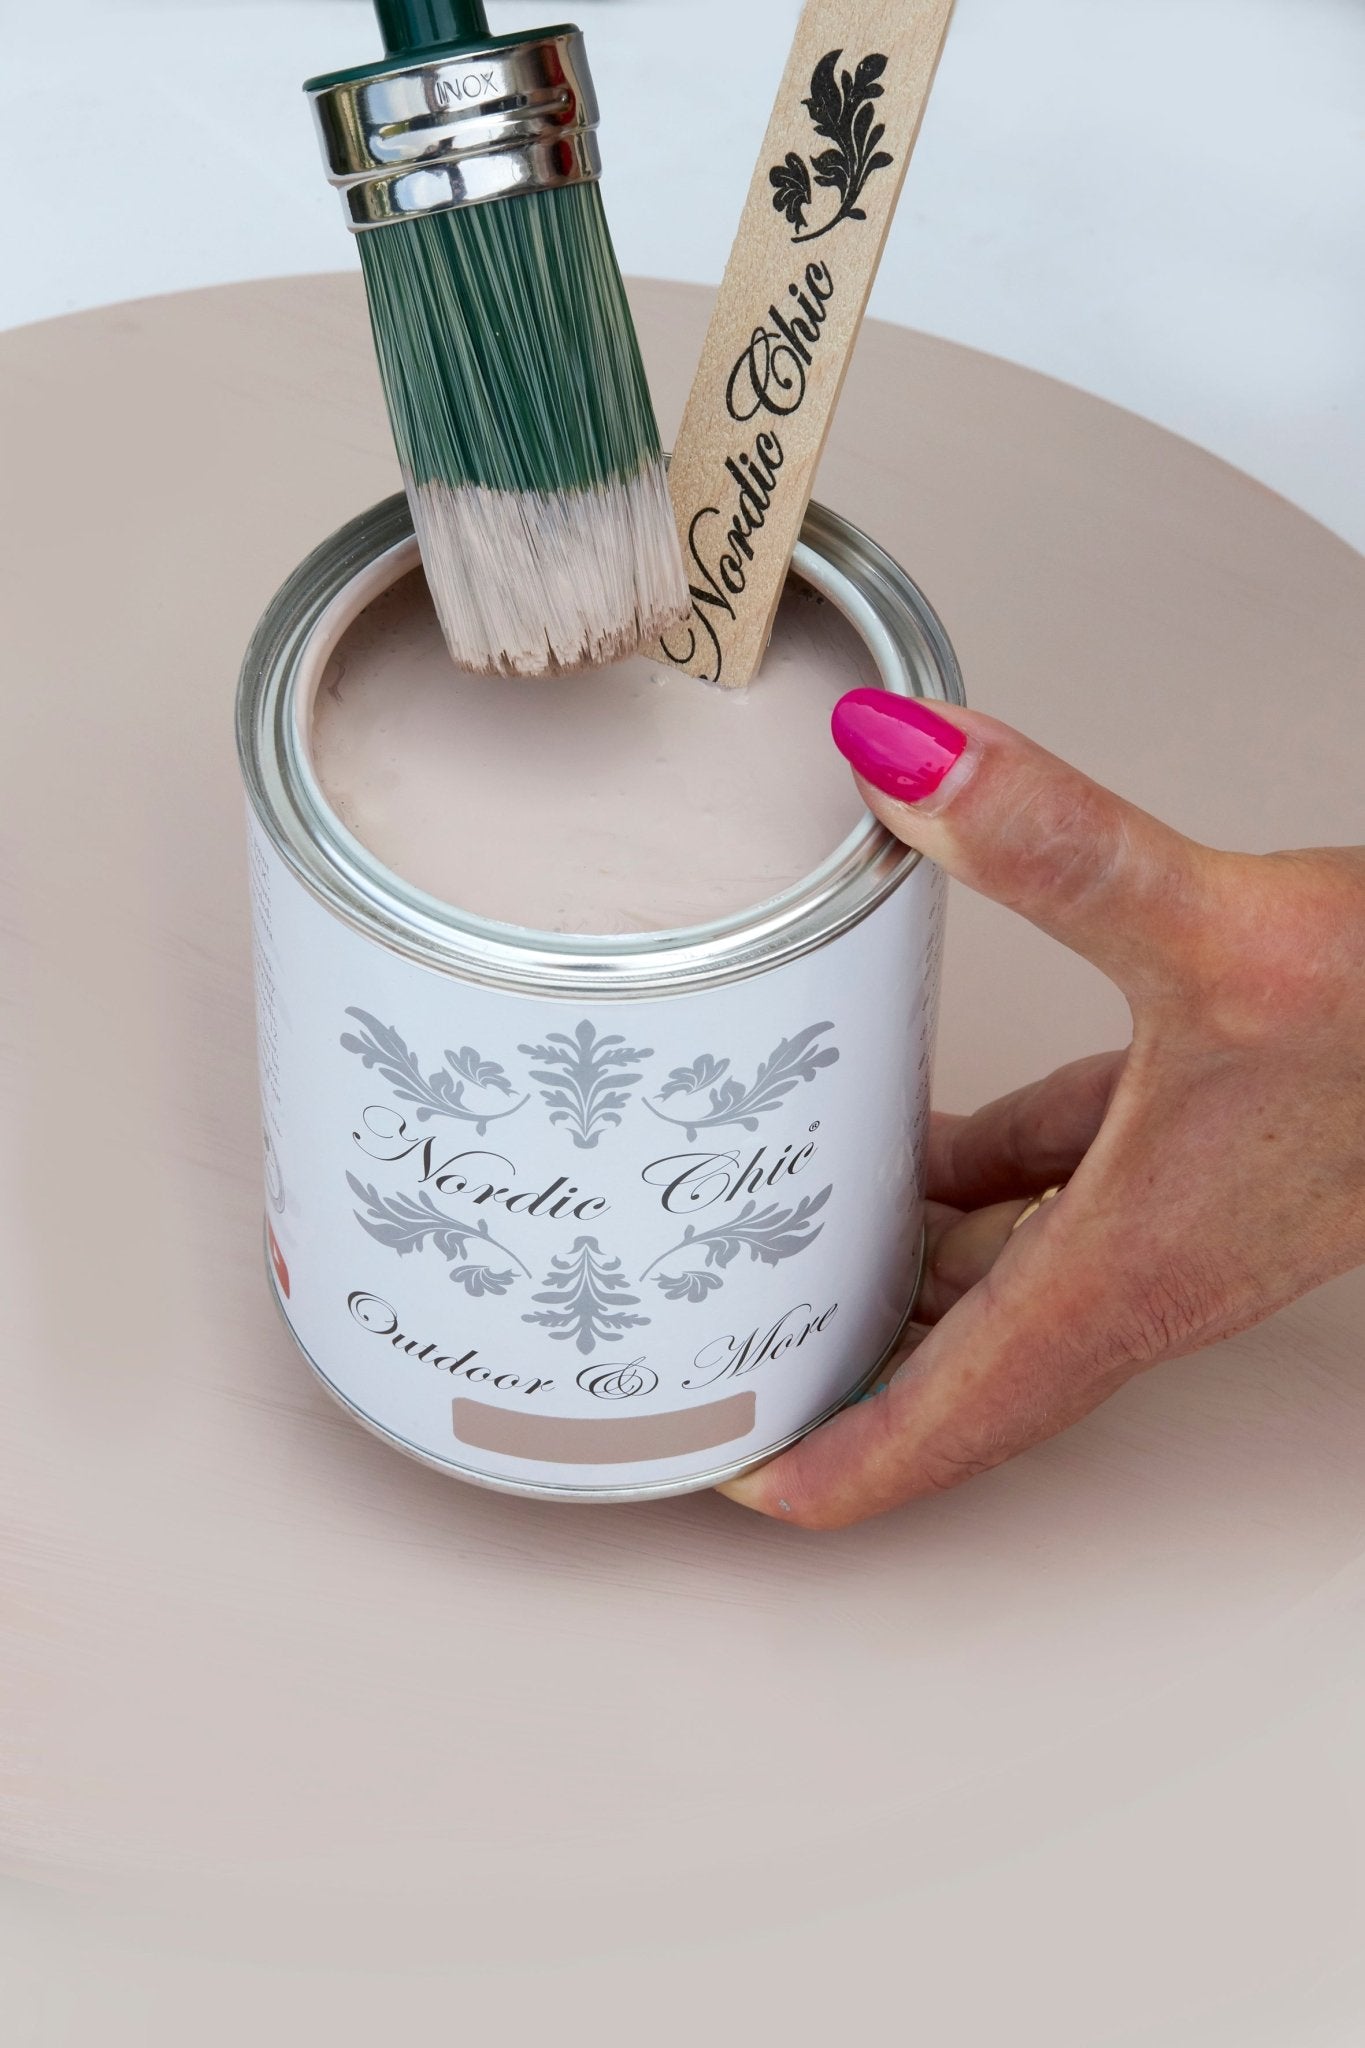 Outdoor & More - interior and exterior chalkpaint with built-in sealer - Nordic Chic®